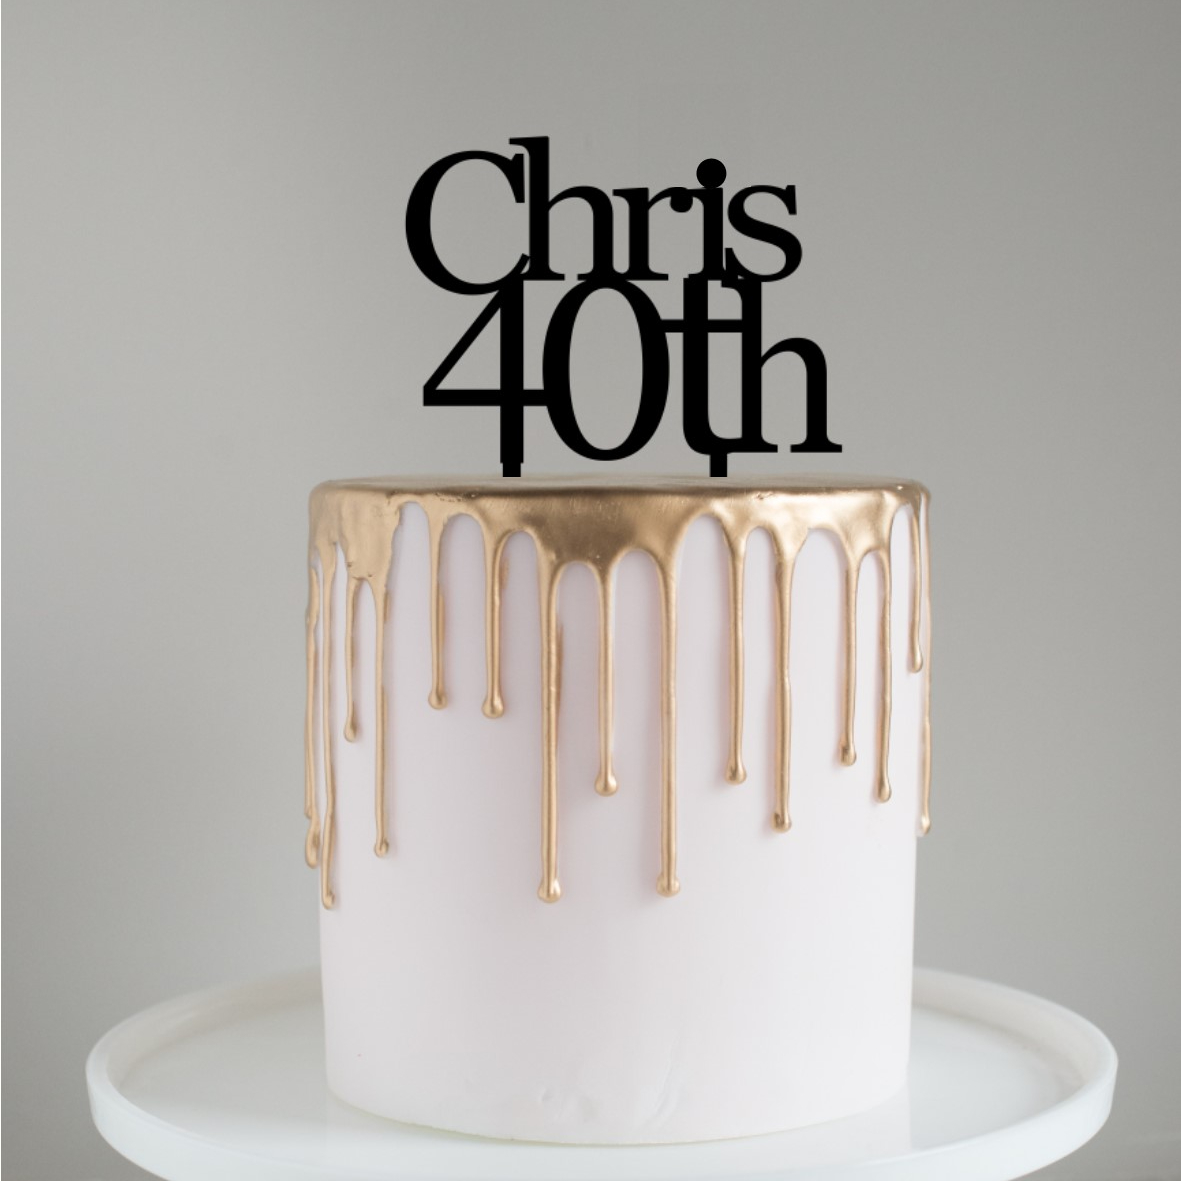 Quick Creations Cake Topper - Chris 40th